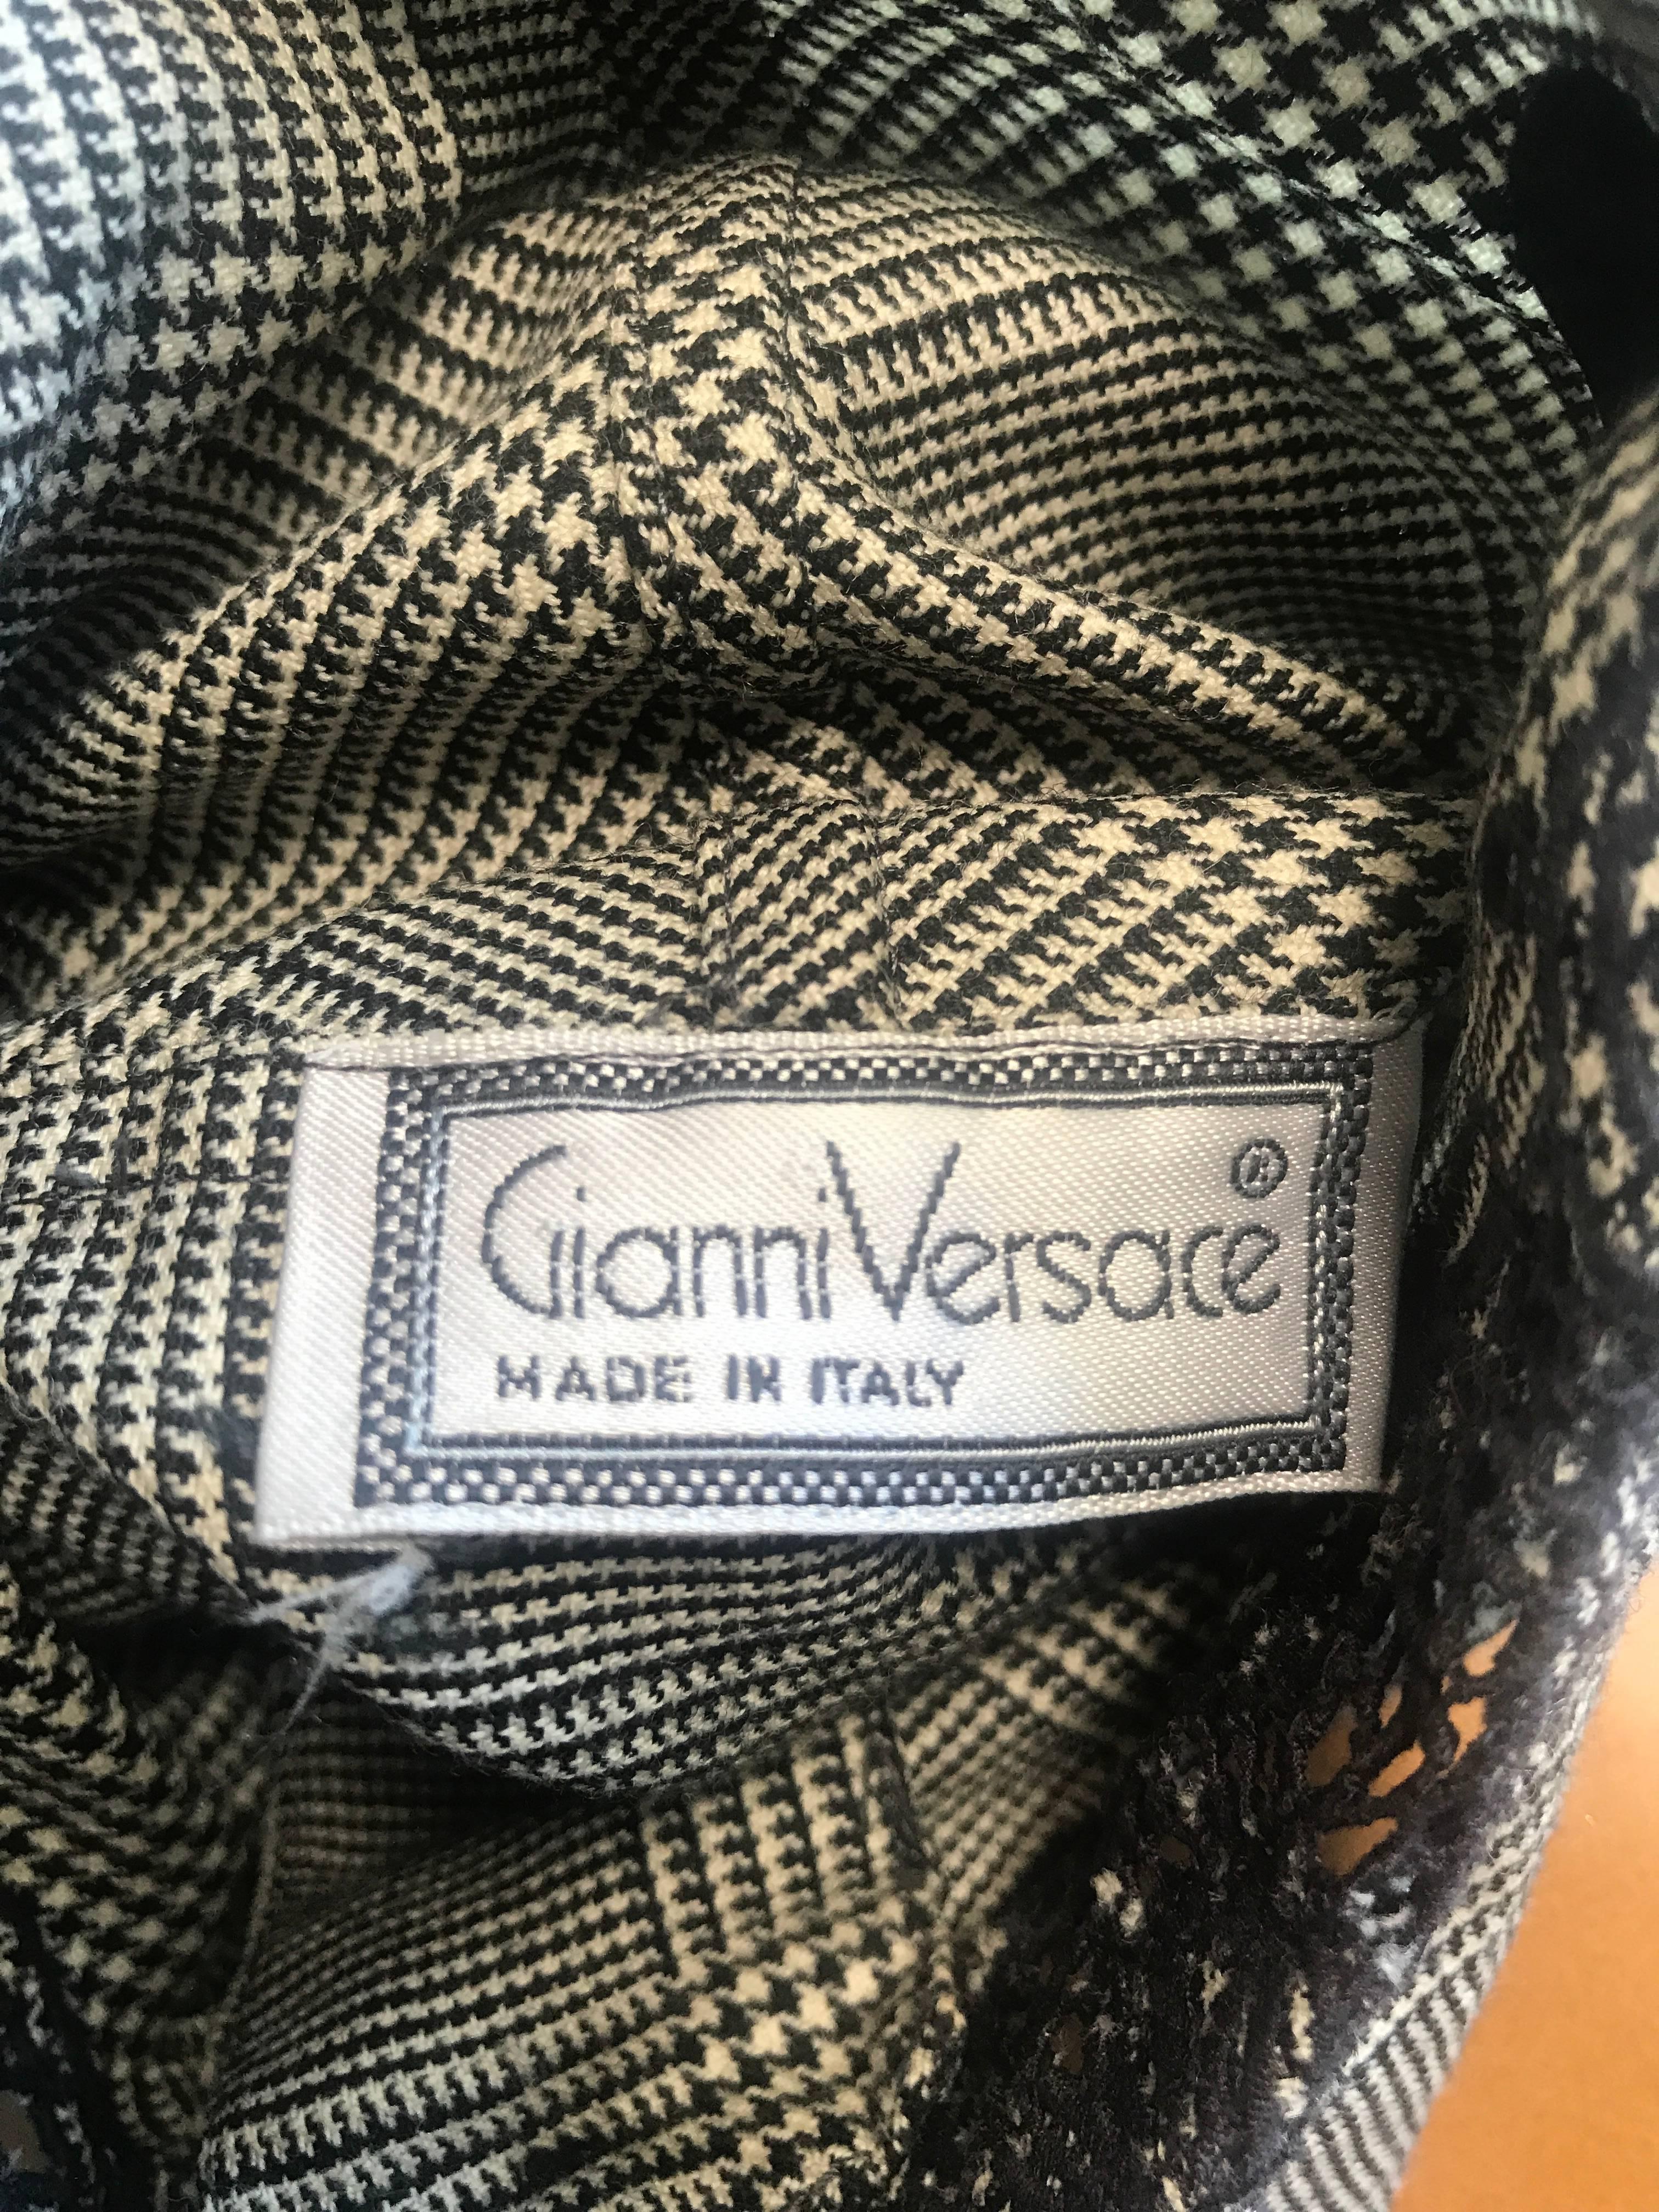 Rare Early Gianni Versace Black and White Houndstooth Plaid Embroidered Vest Top For Sale 4